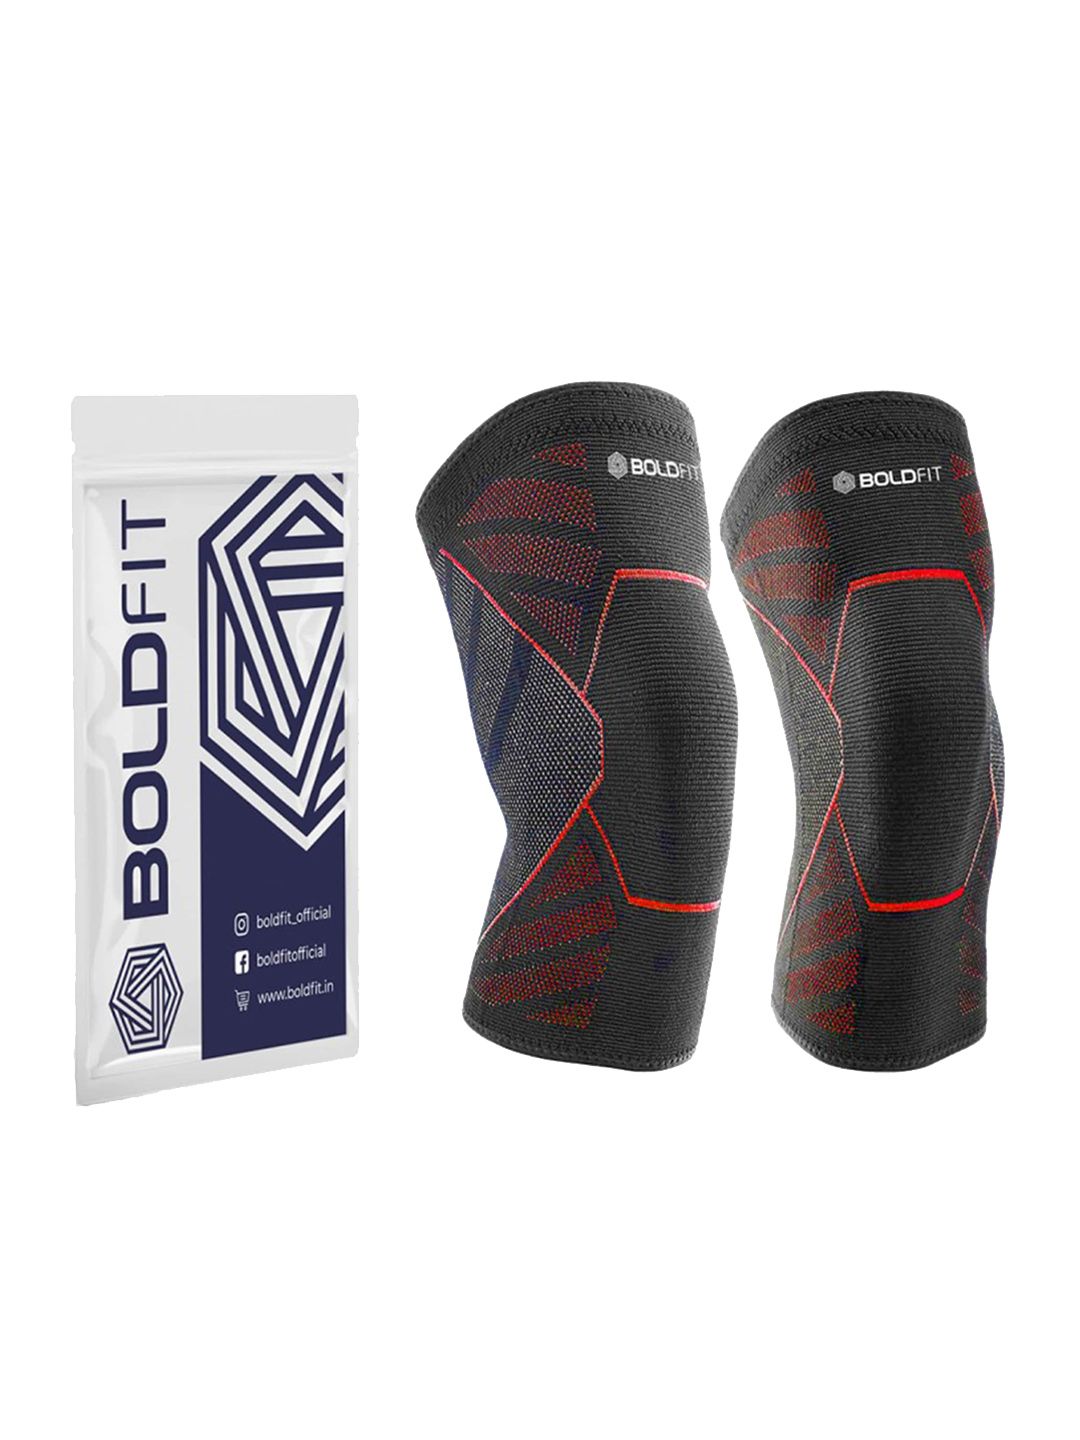 BOLDFIT Black & Red Solid Knee Support Cap Price in India